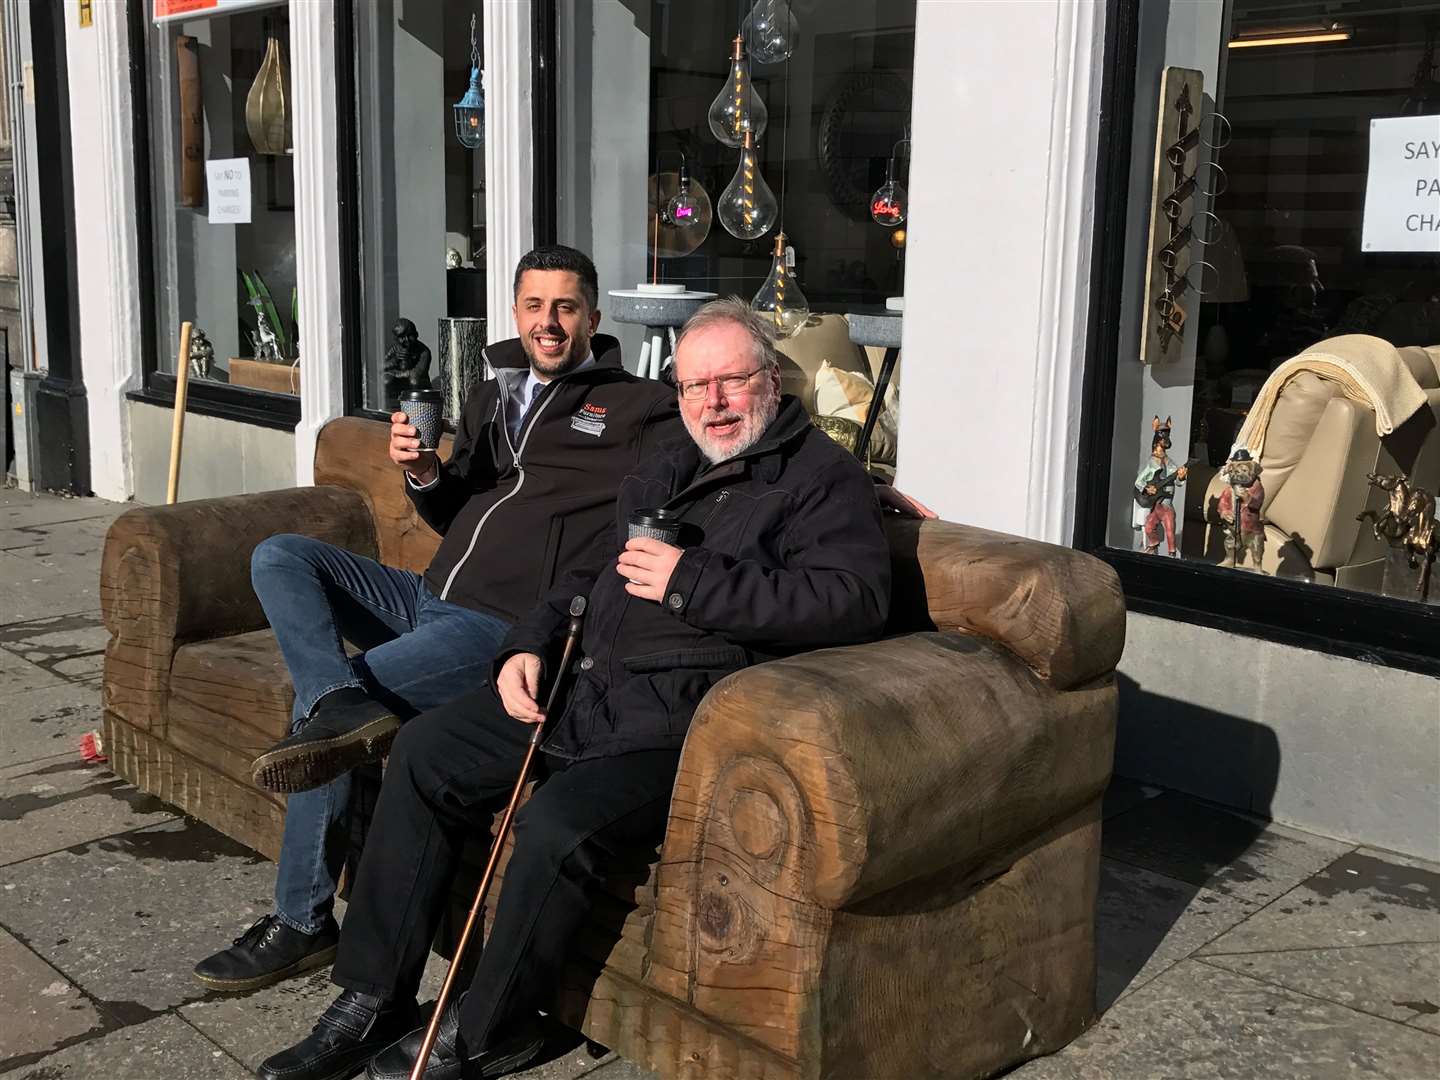 This new wooden sofa outside Sams Furniture in Wick is proving to be a popular addition to the town centre. Enjoying a coffee in the sunshine on Monday morning are store owner Sam Salim (left) and his friend Meinrad Waldkirch.